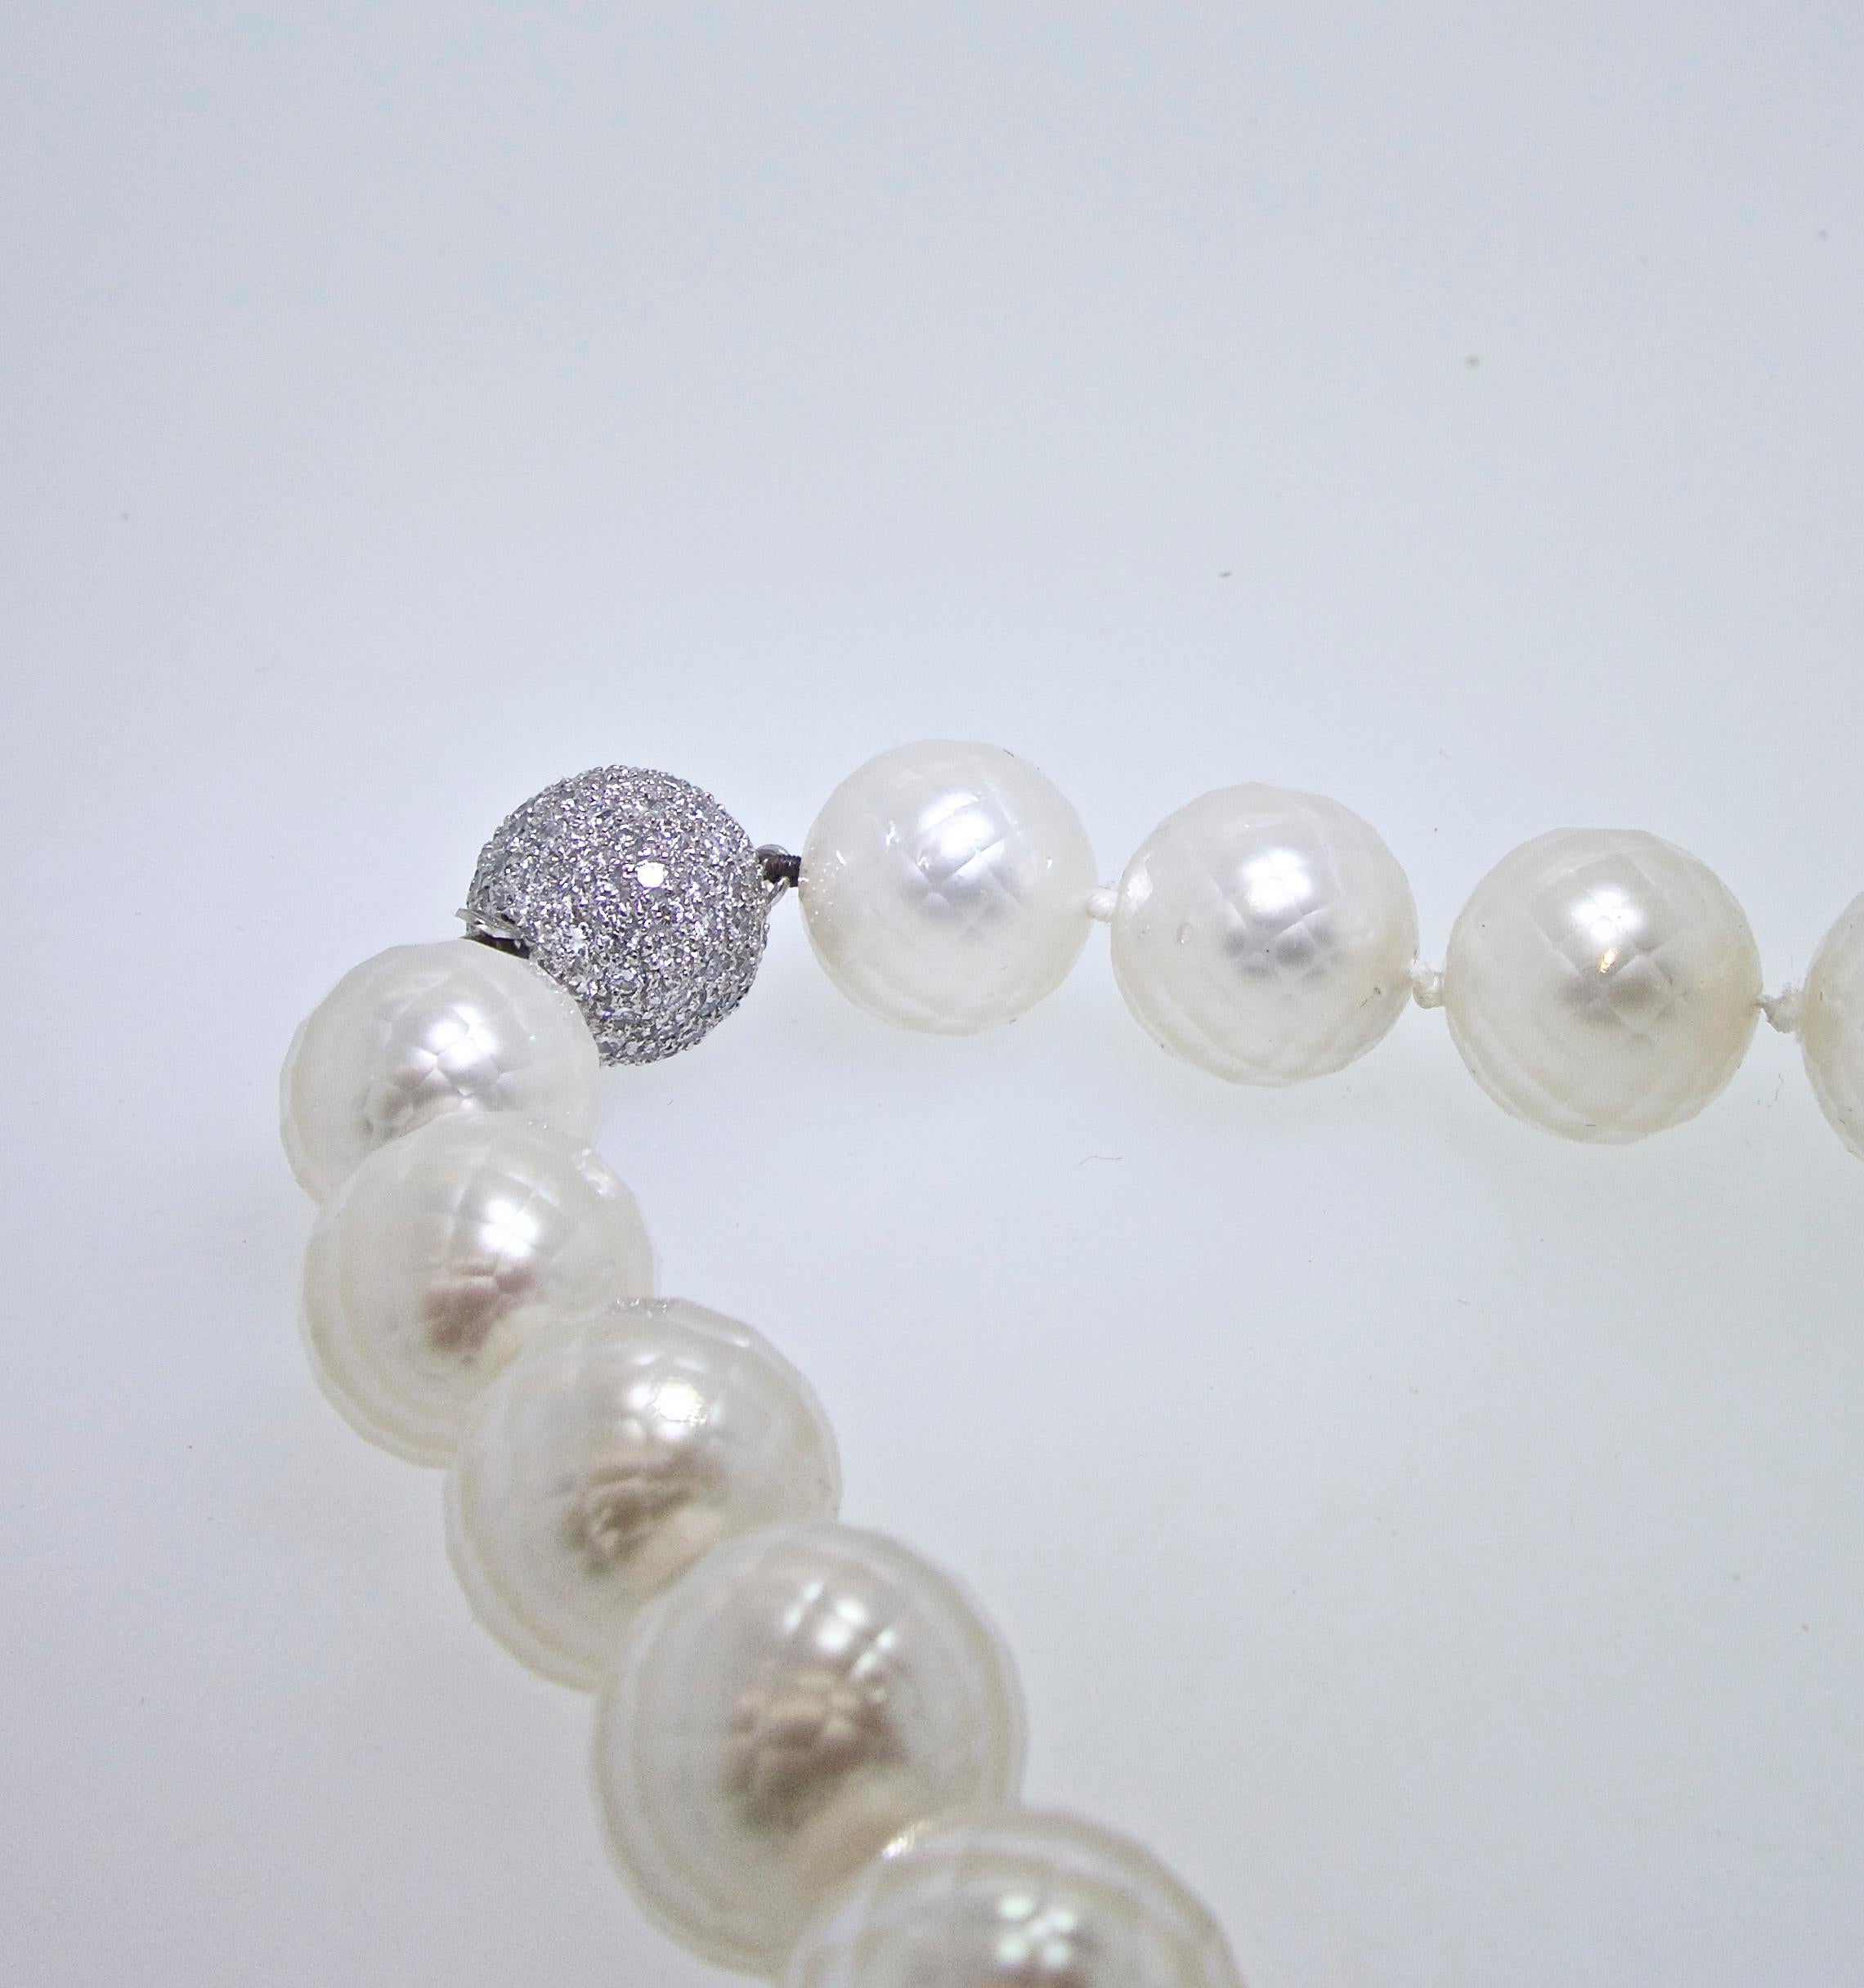 Faceted South Sea Pearls, Unusual and Distinctive with a Diamond Last (Moderne)